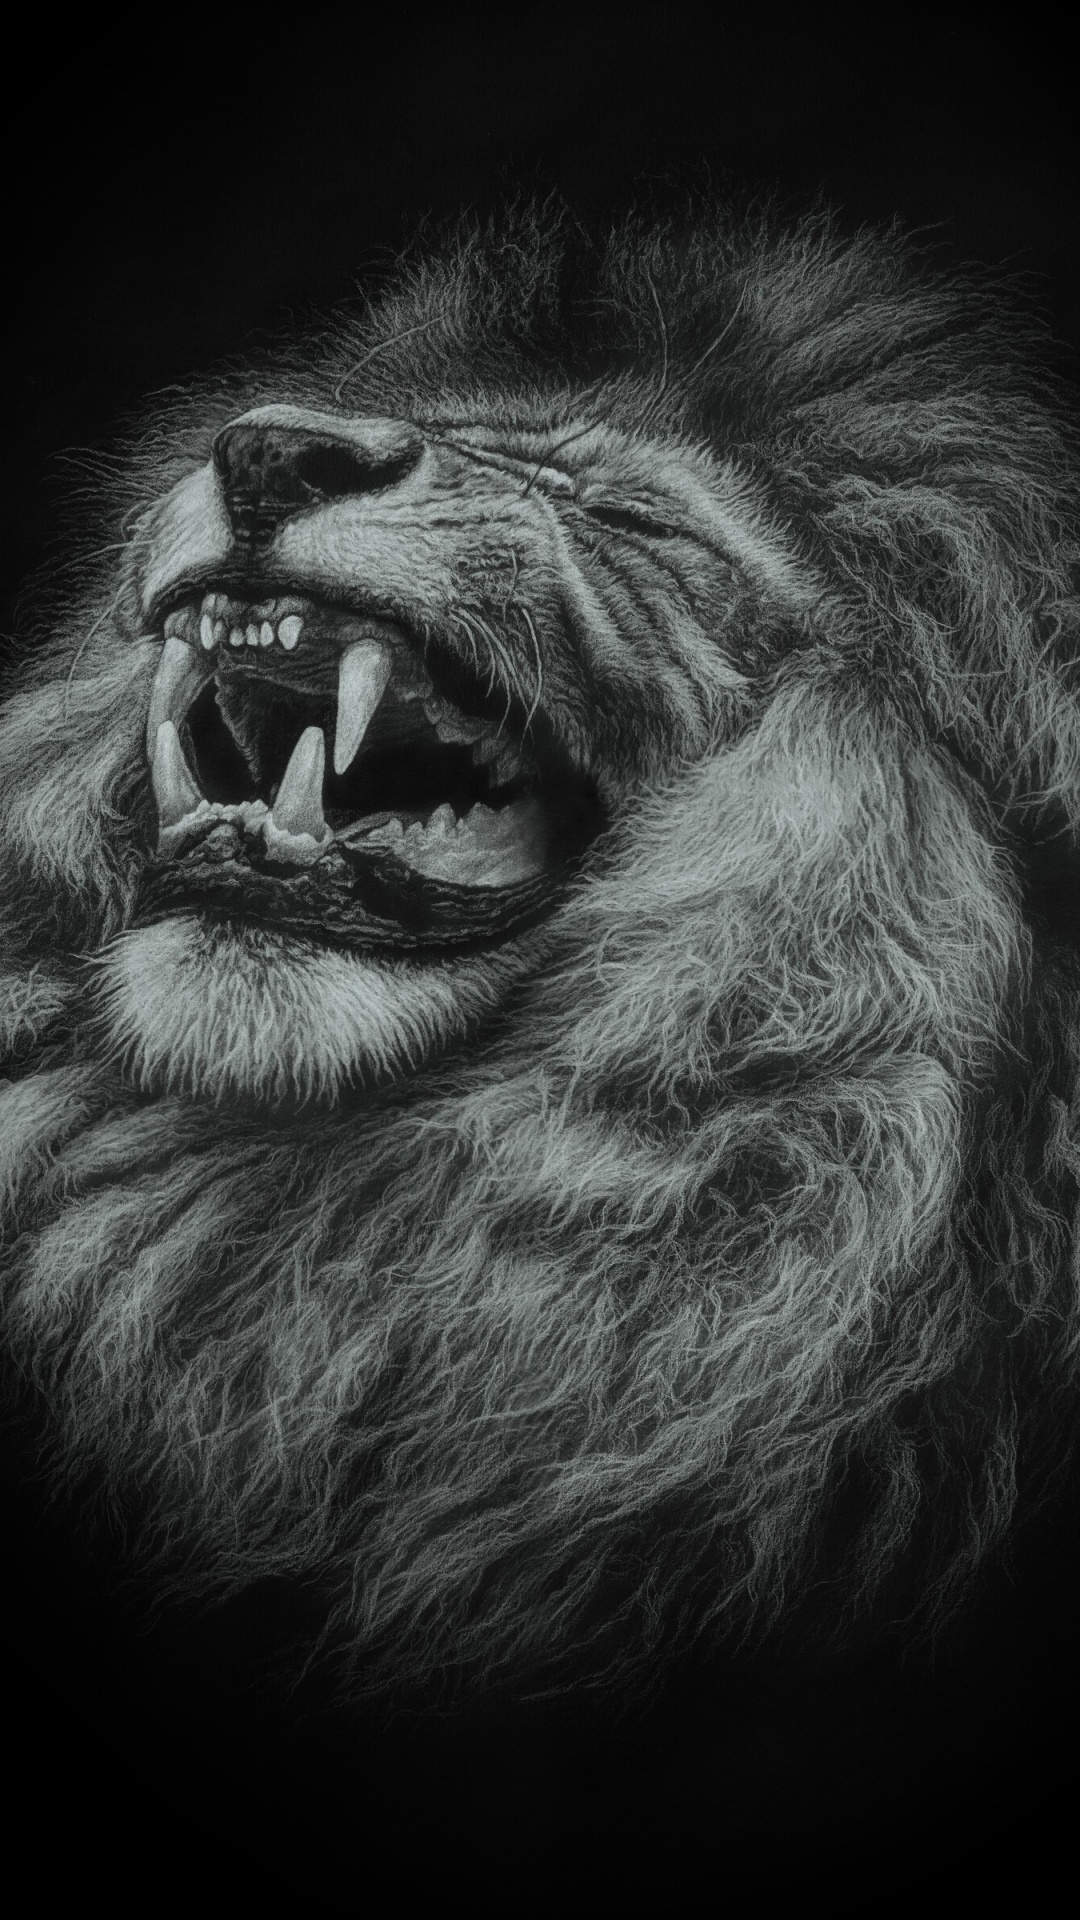 Lion With Mouth Open Illustration. Wallpaper in 1080x1920 Resolution